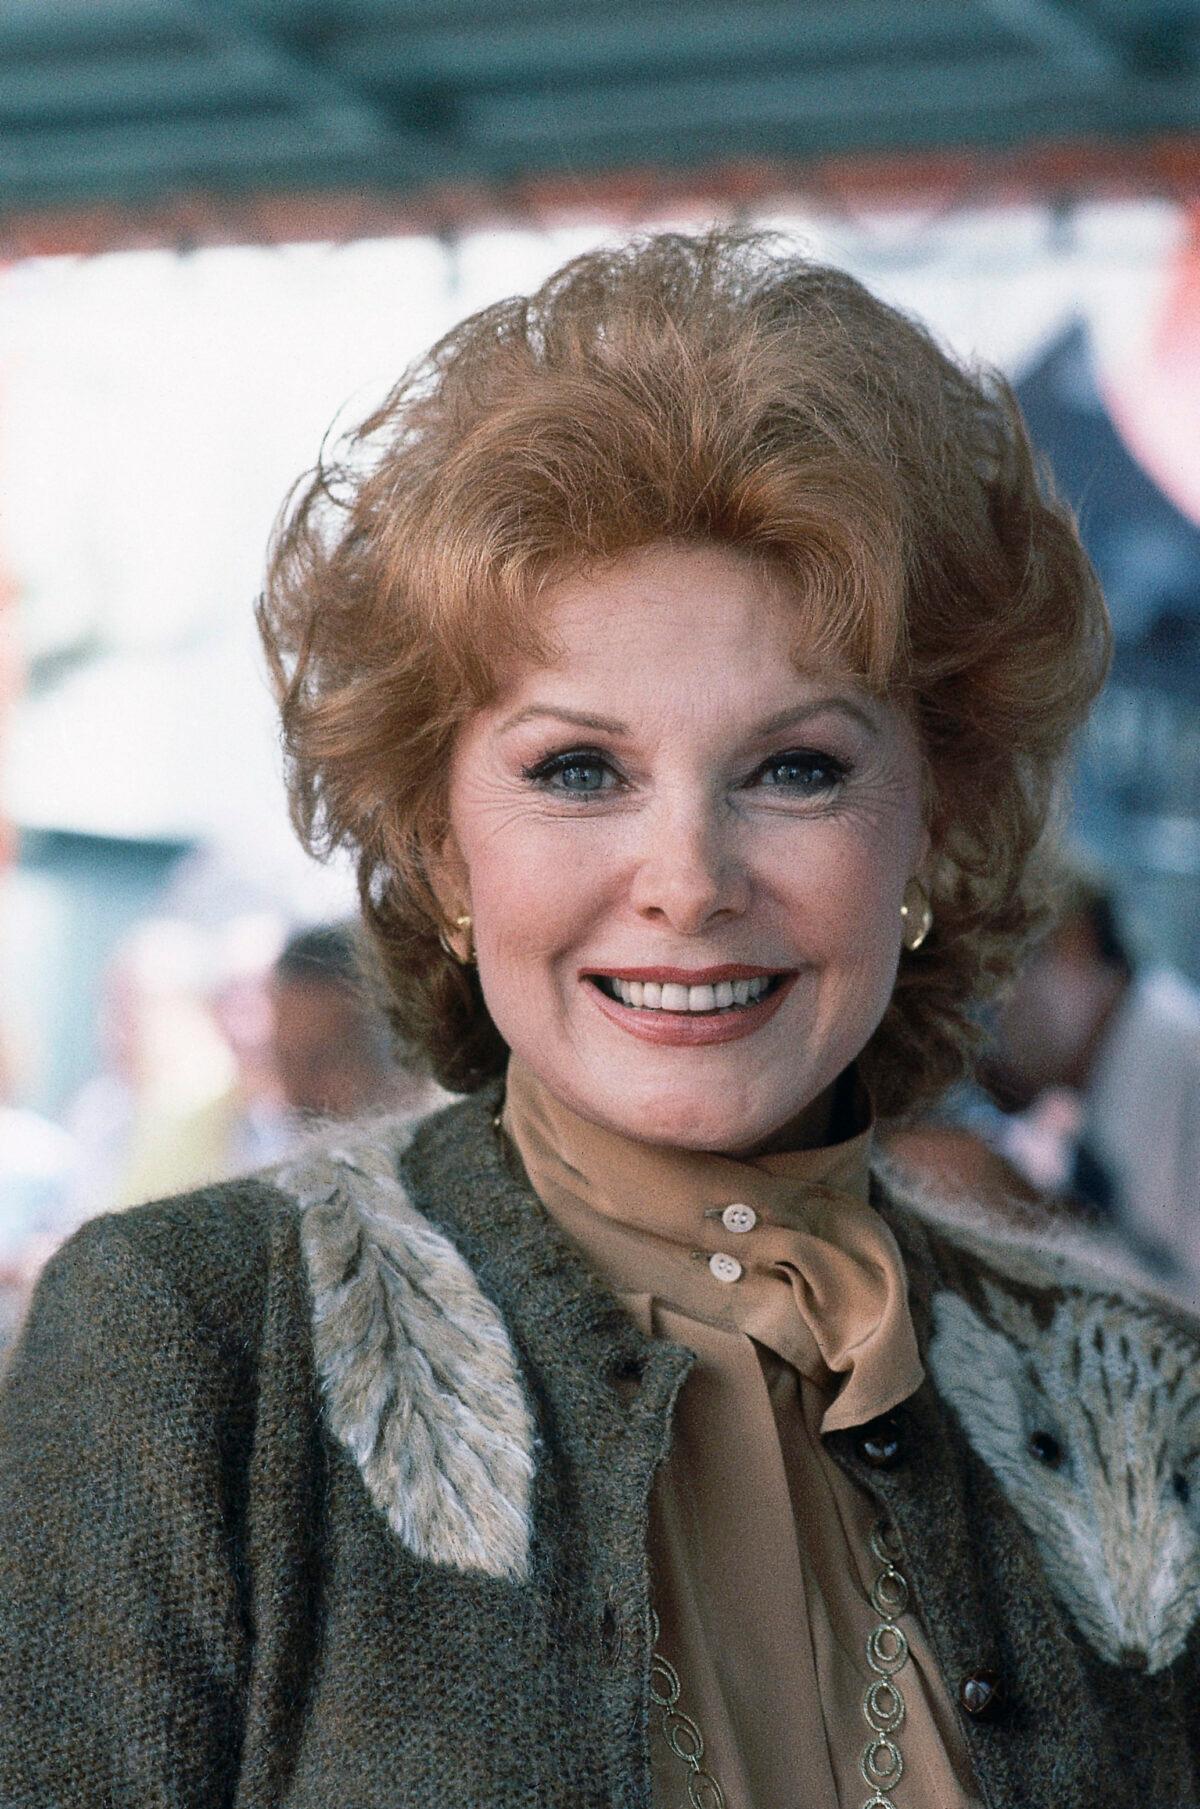 Actress Rhonda Fleming poses for a photo in Hollywood, Calif., on Sept. 28, 1981. (Wally Fong/AP)